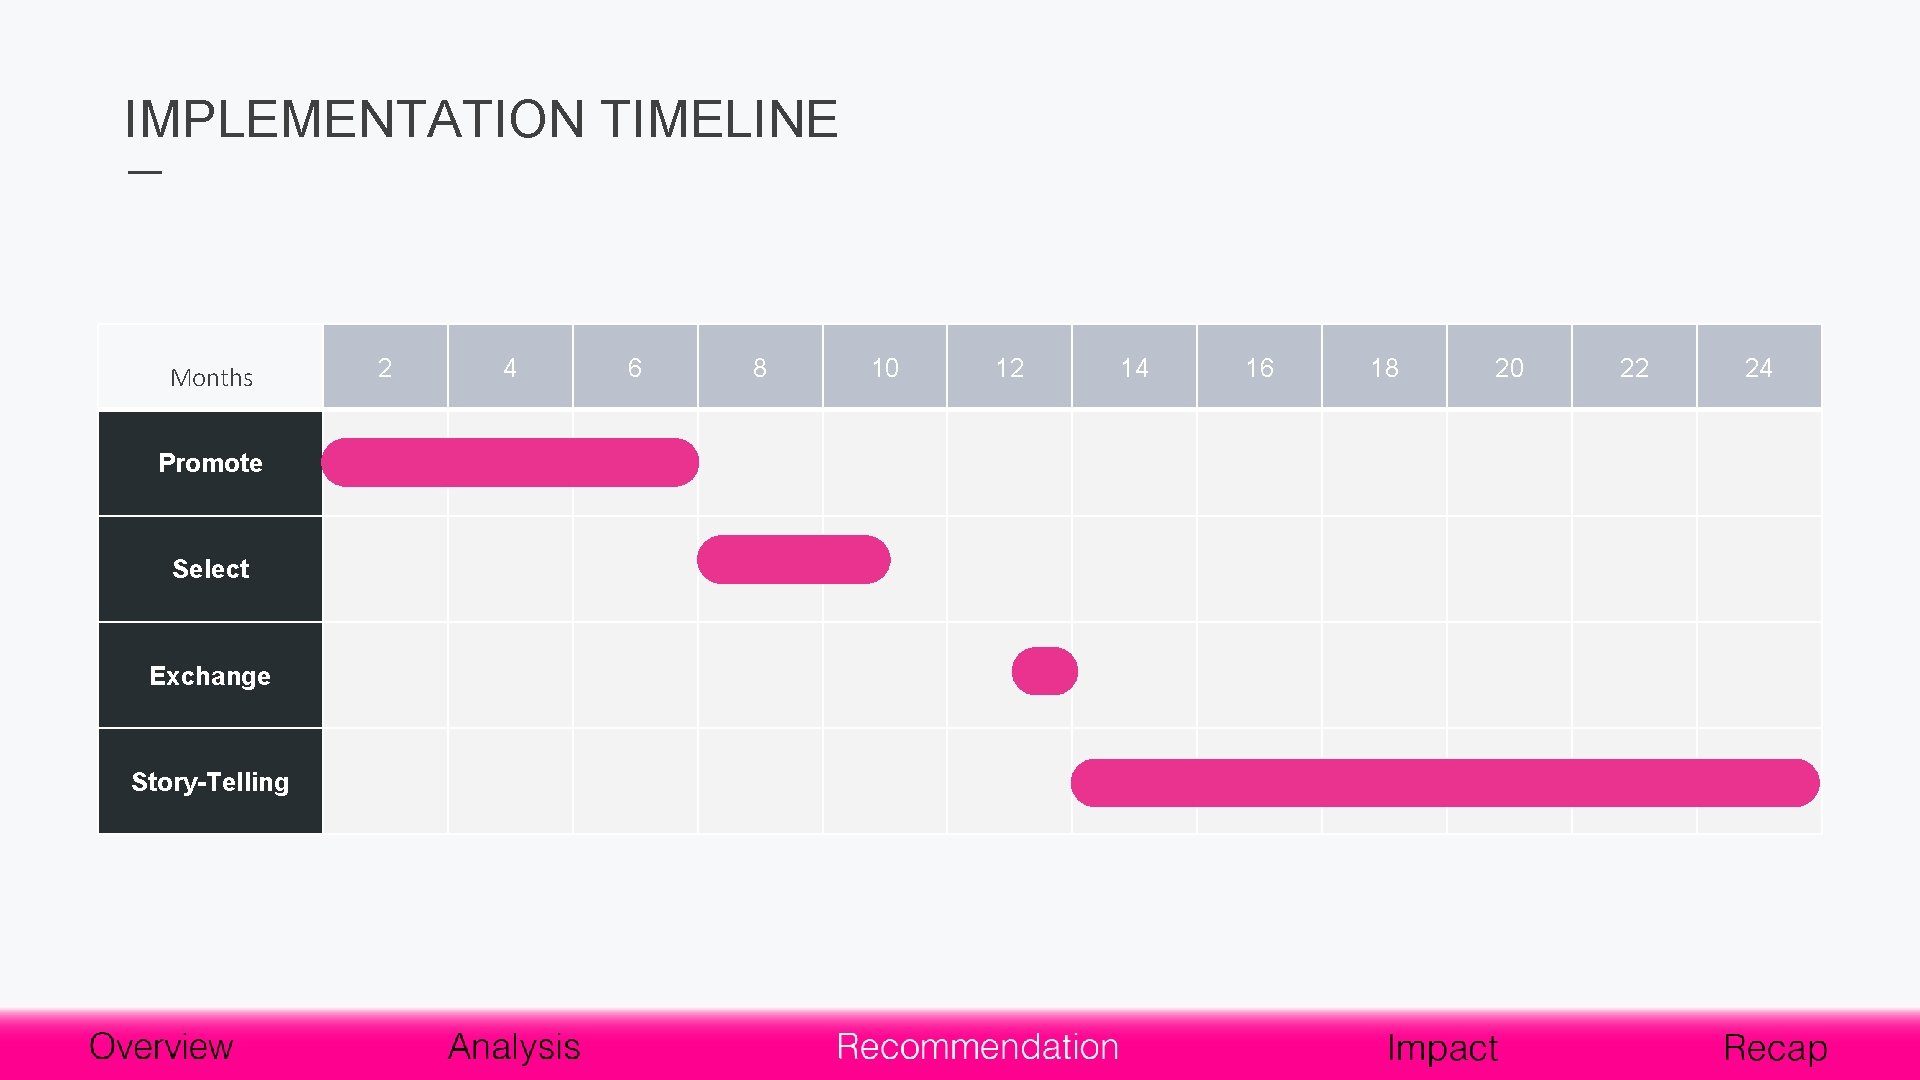 IMPLEMENTATION TIMELINE Months Promote Select Exchange Story-Telling 2 4 6 8 10 12 14